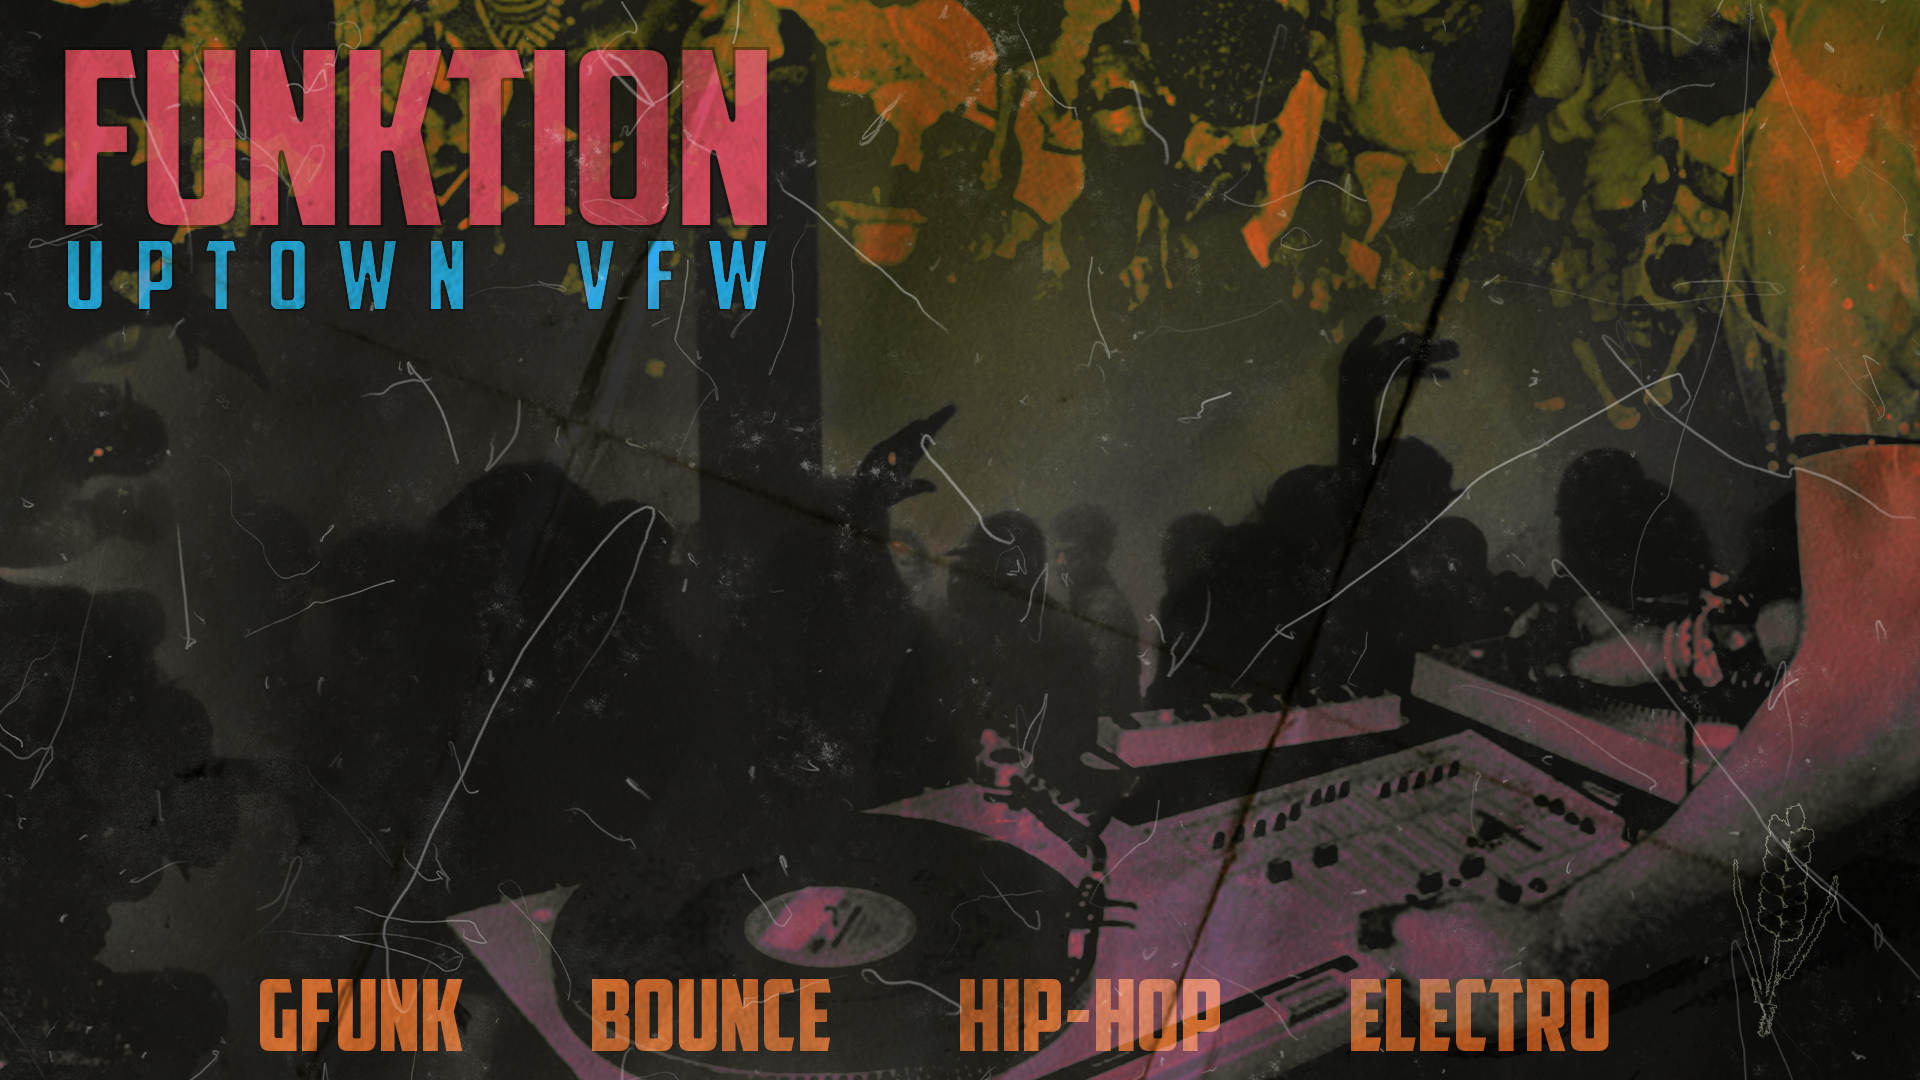 Funktion Featuring: KE/MA DJ SCI FI Friday, September 29 James Ballentine "Uptown" VFW Post 246 2916 Lyndale Ave S. Doors 10:00pm :: Music 10:00pm :: 21+ GA $5 ADV / $10 DOS